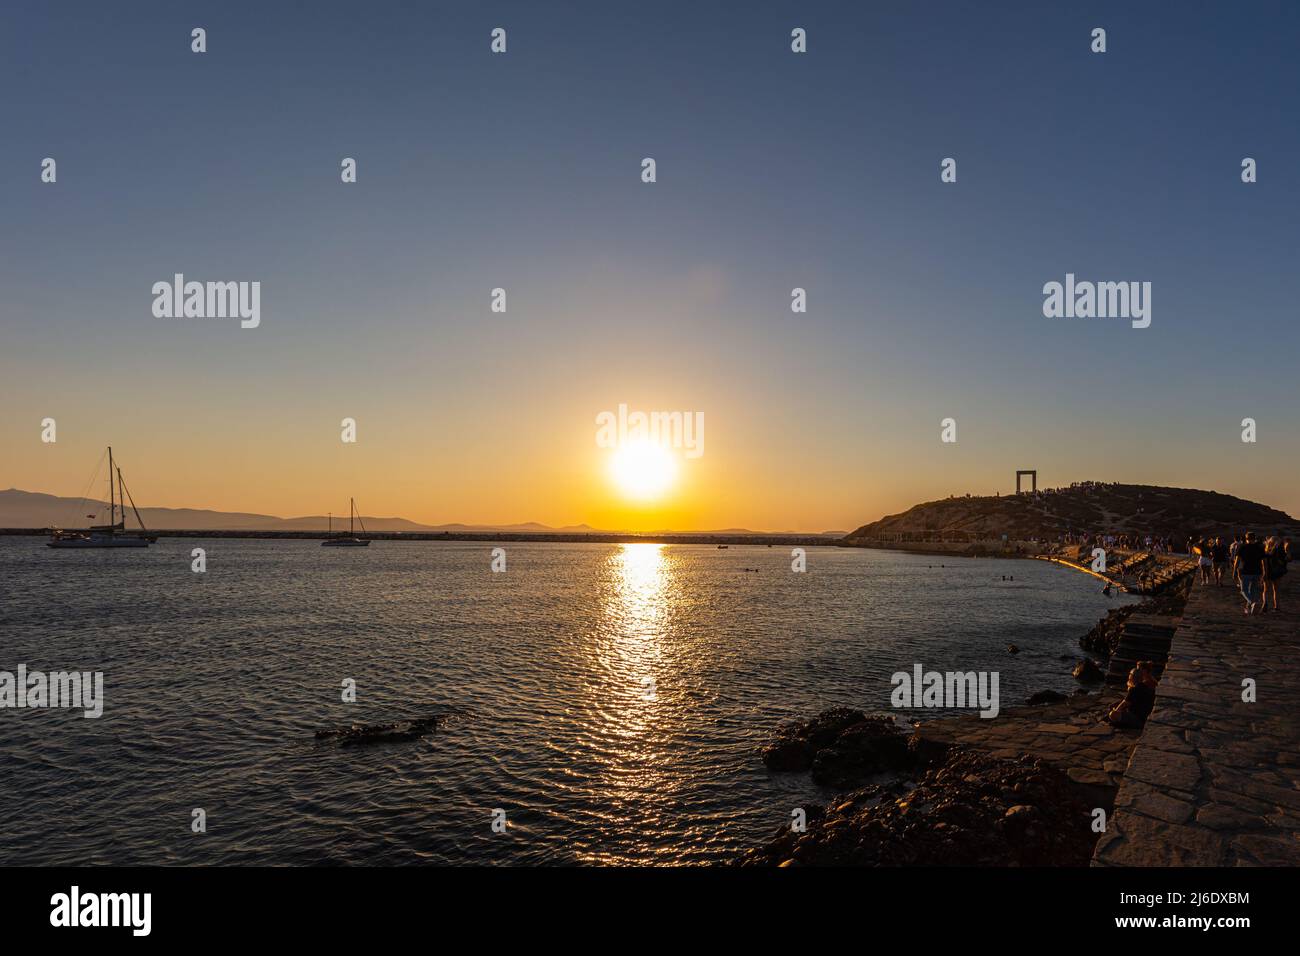 Sunset in Naxos Bay. The red and yellow glowing sun sinks on the horizon. Boats anchor and lie off the coast. Romantic scene in the Cyladen archipelag Stock Photo